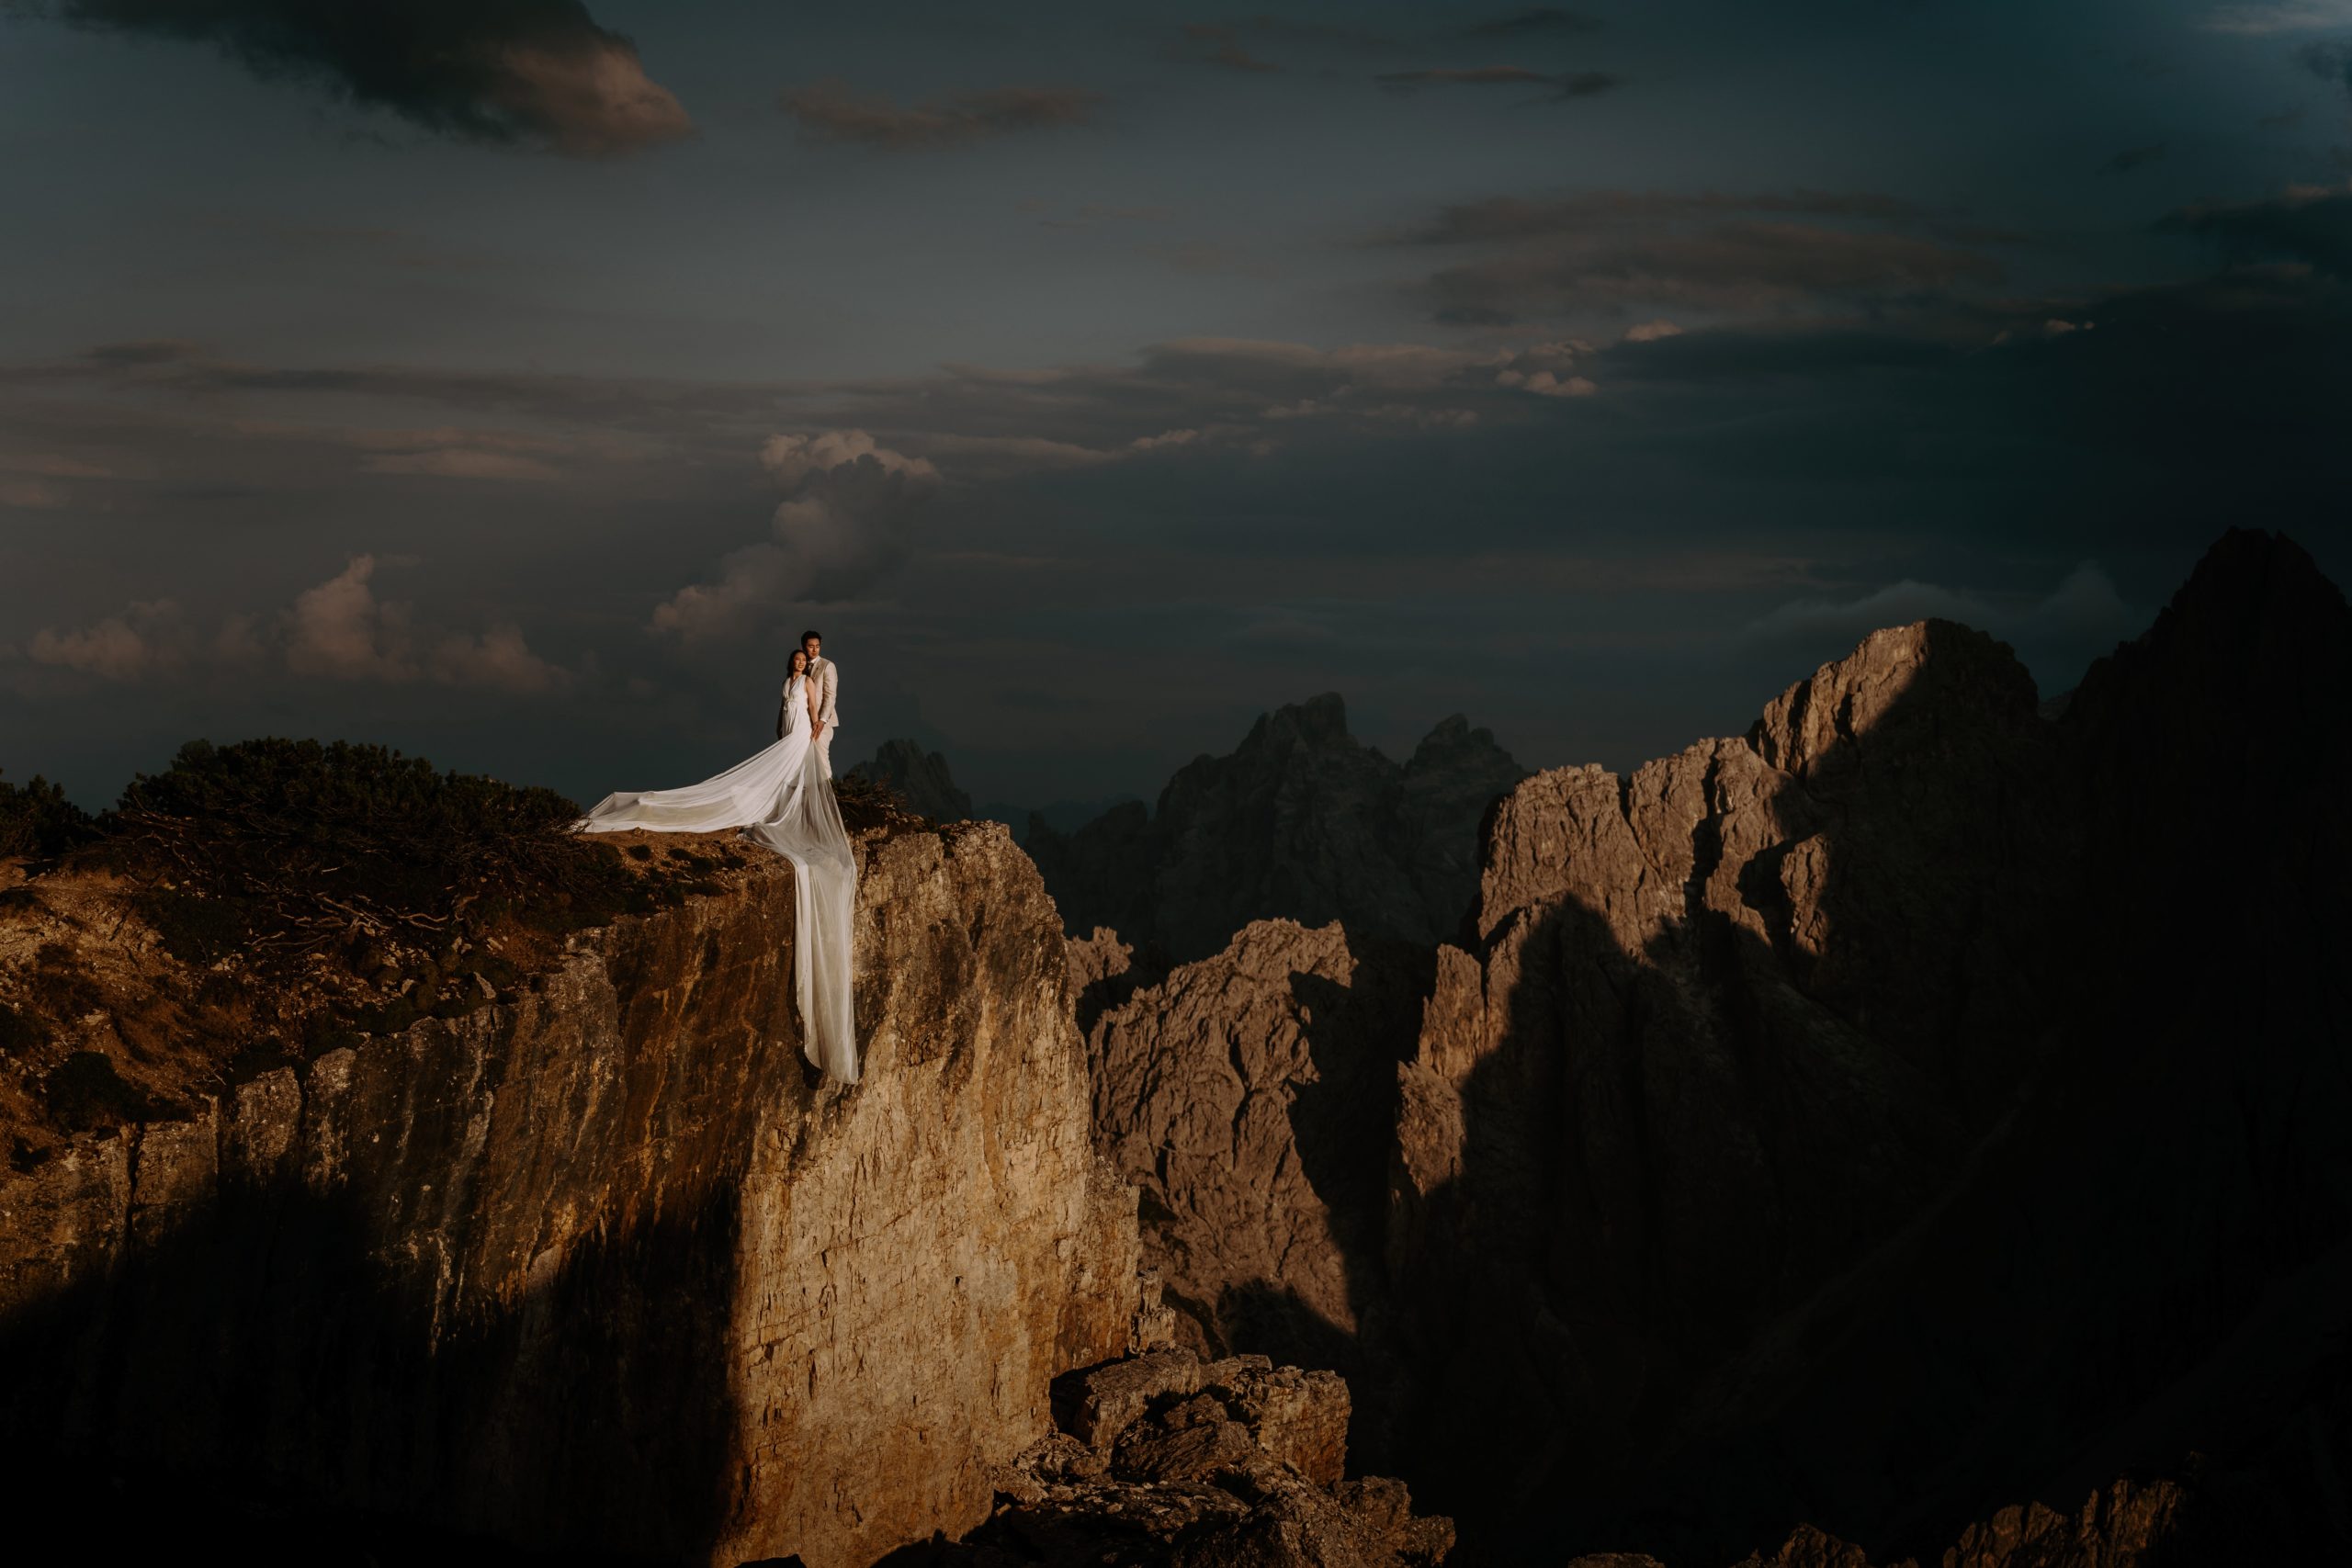 A couple during sunset at Tre Cime for their elopement photoshoot